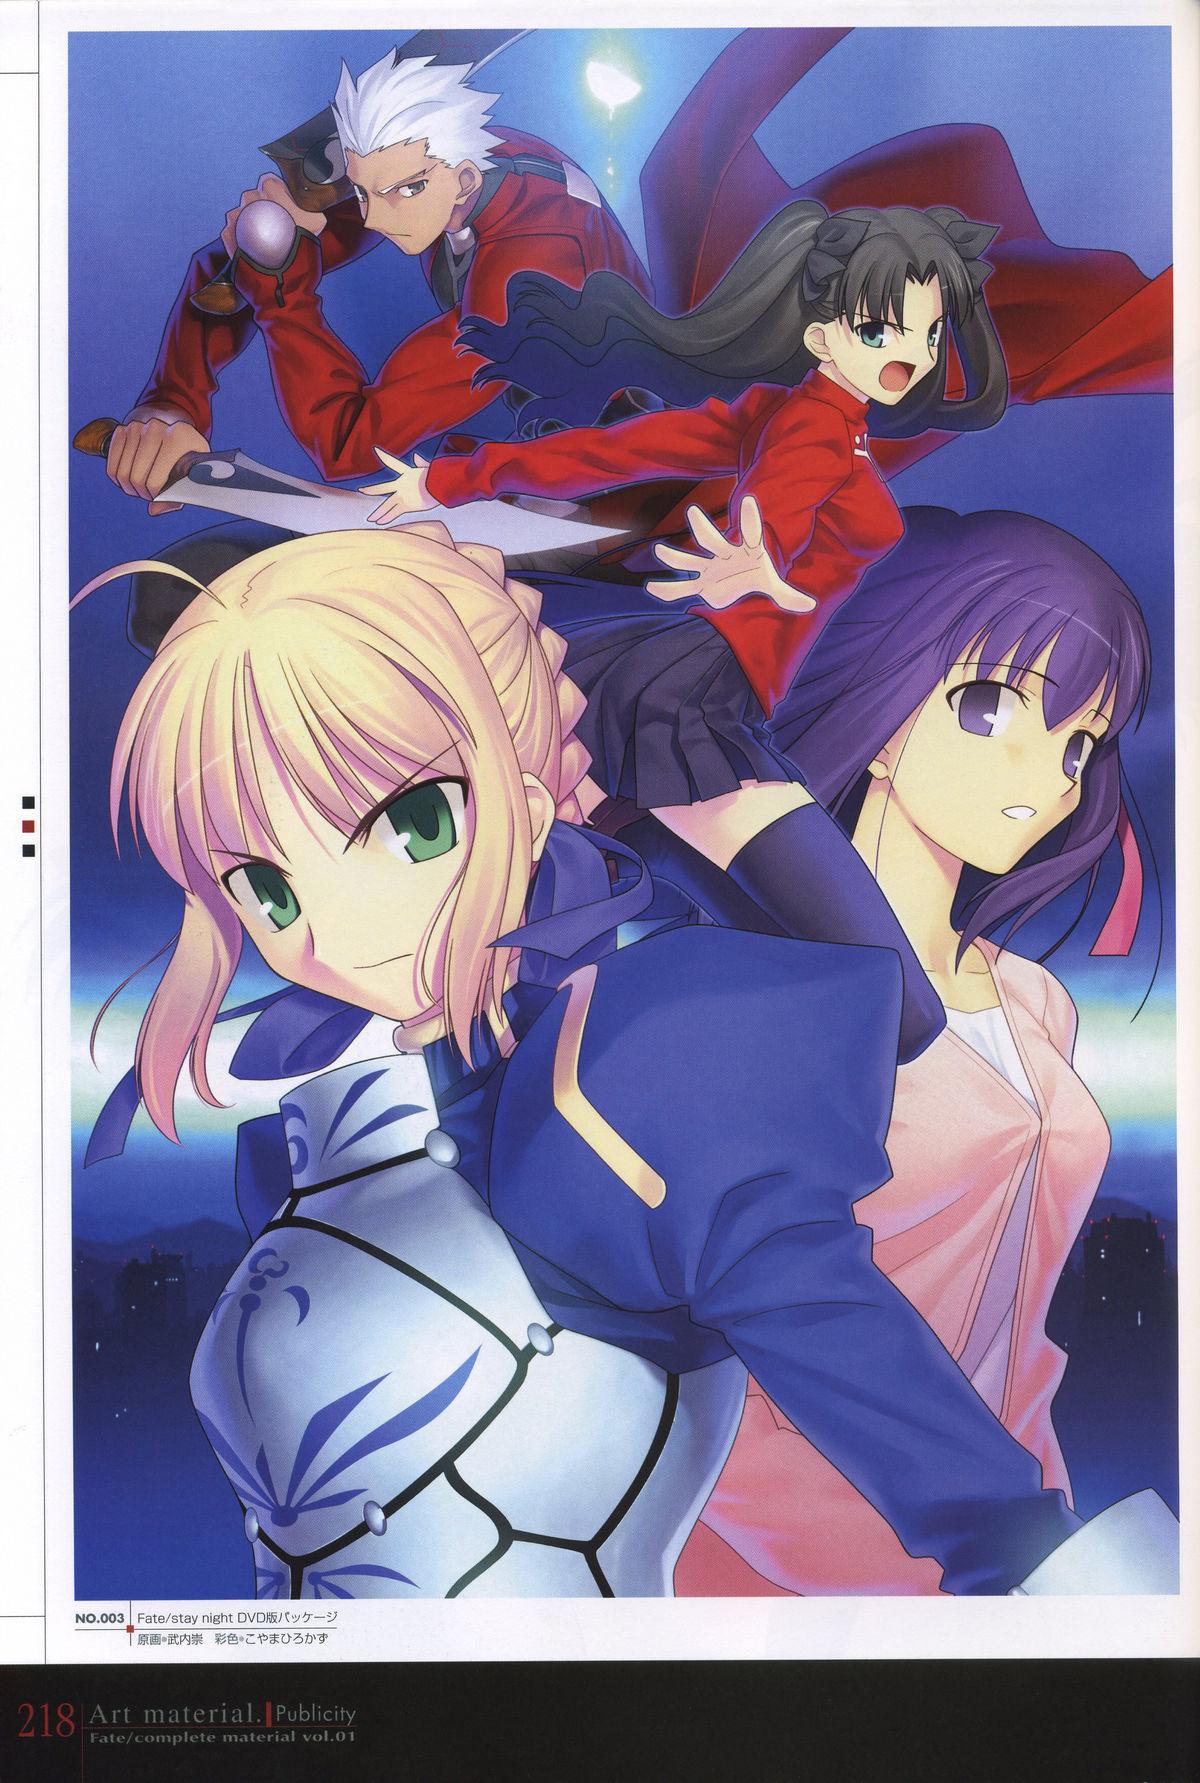 Fate/complete material I - Art material. 222